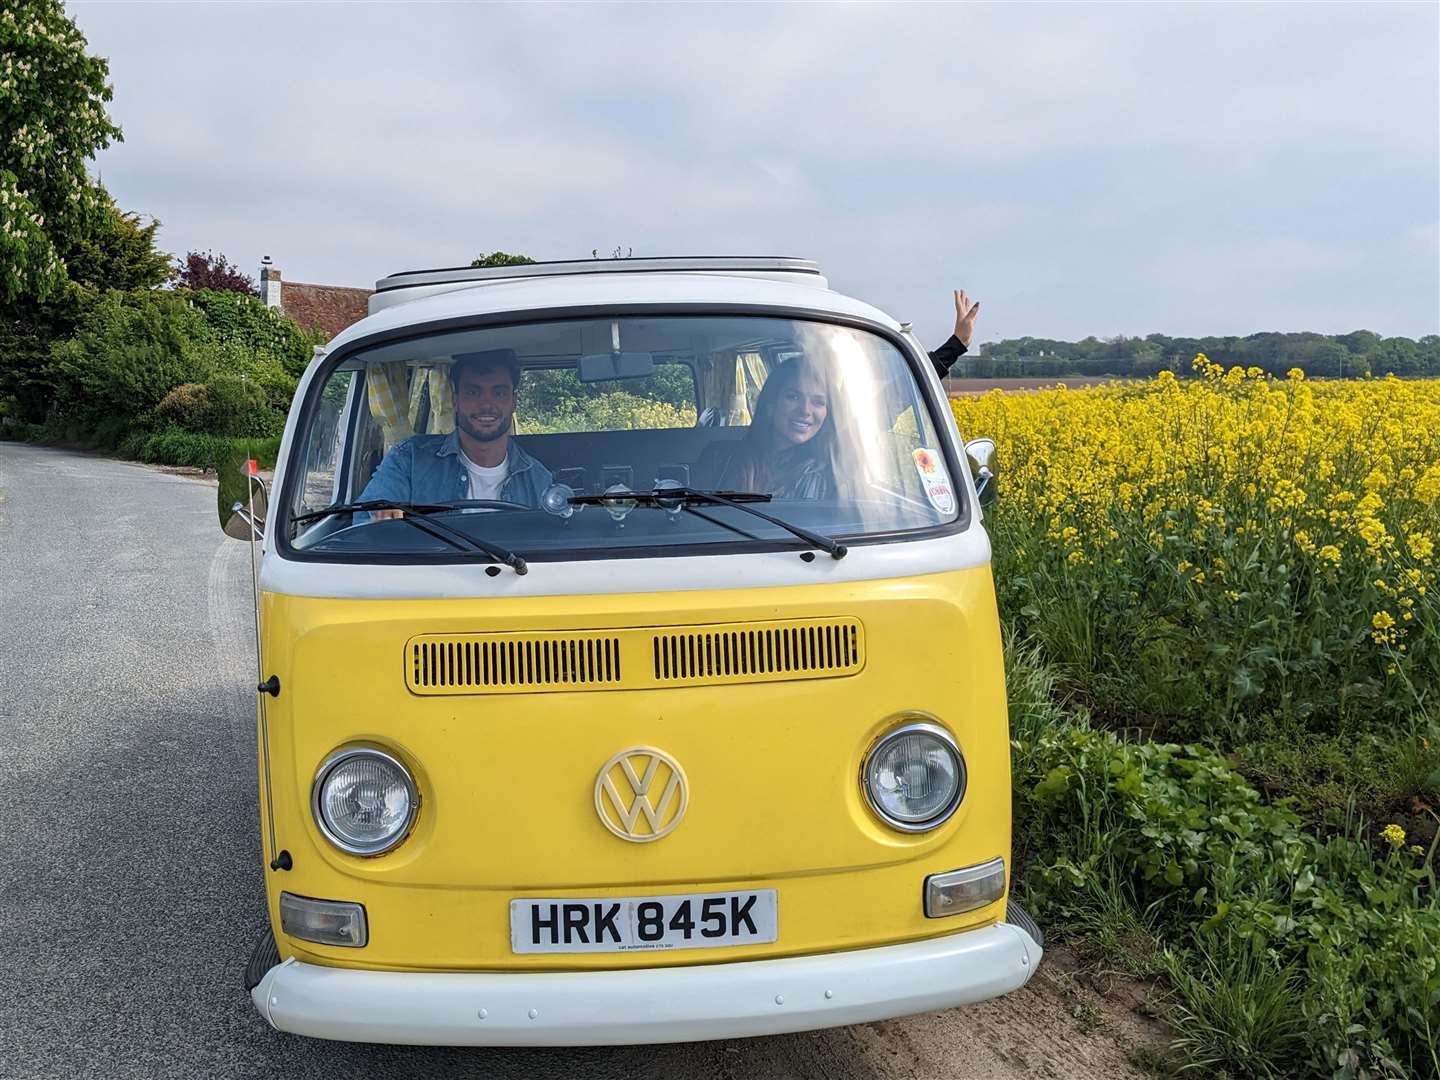 The celebrity couple travel through east Kent in a 1970s VW motorhome. Picture: BBC/STV Studios